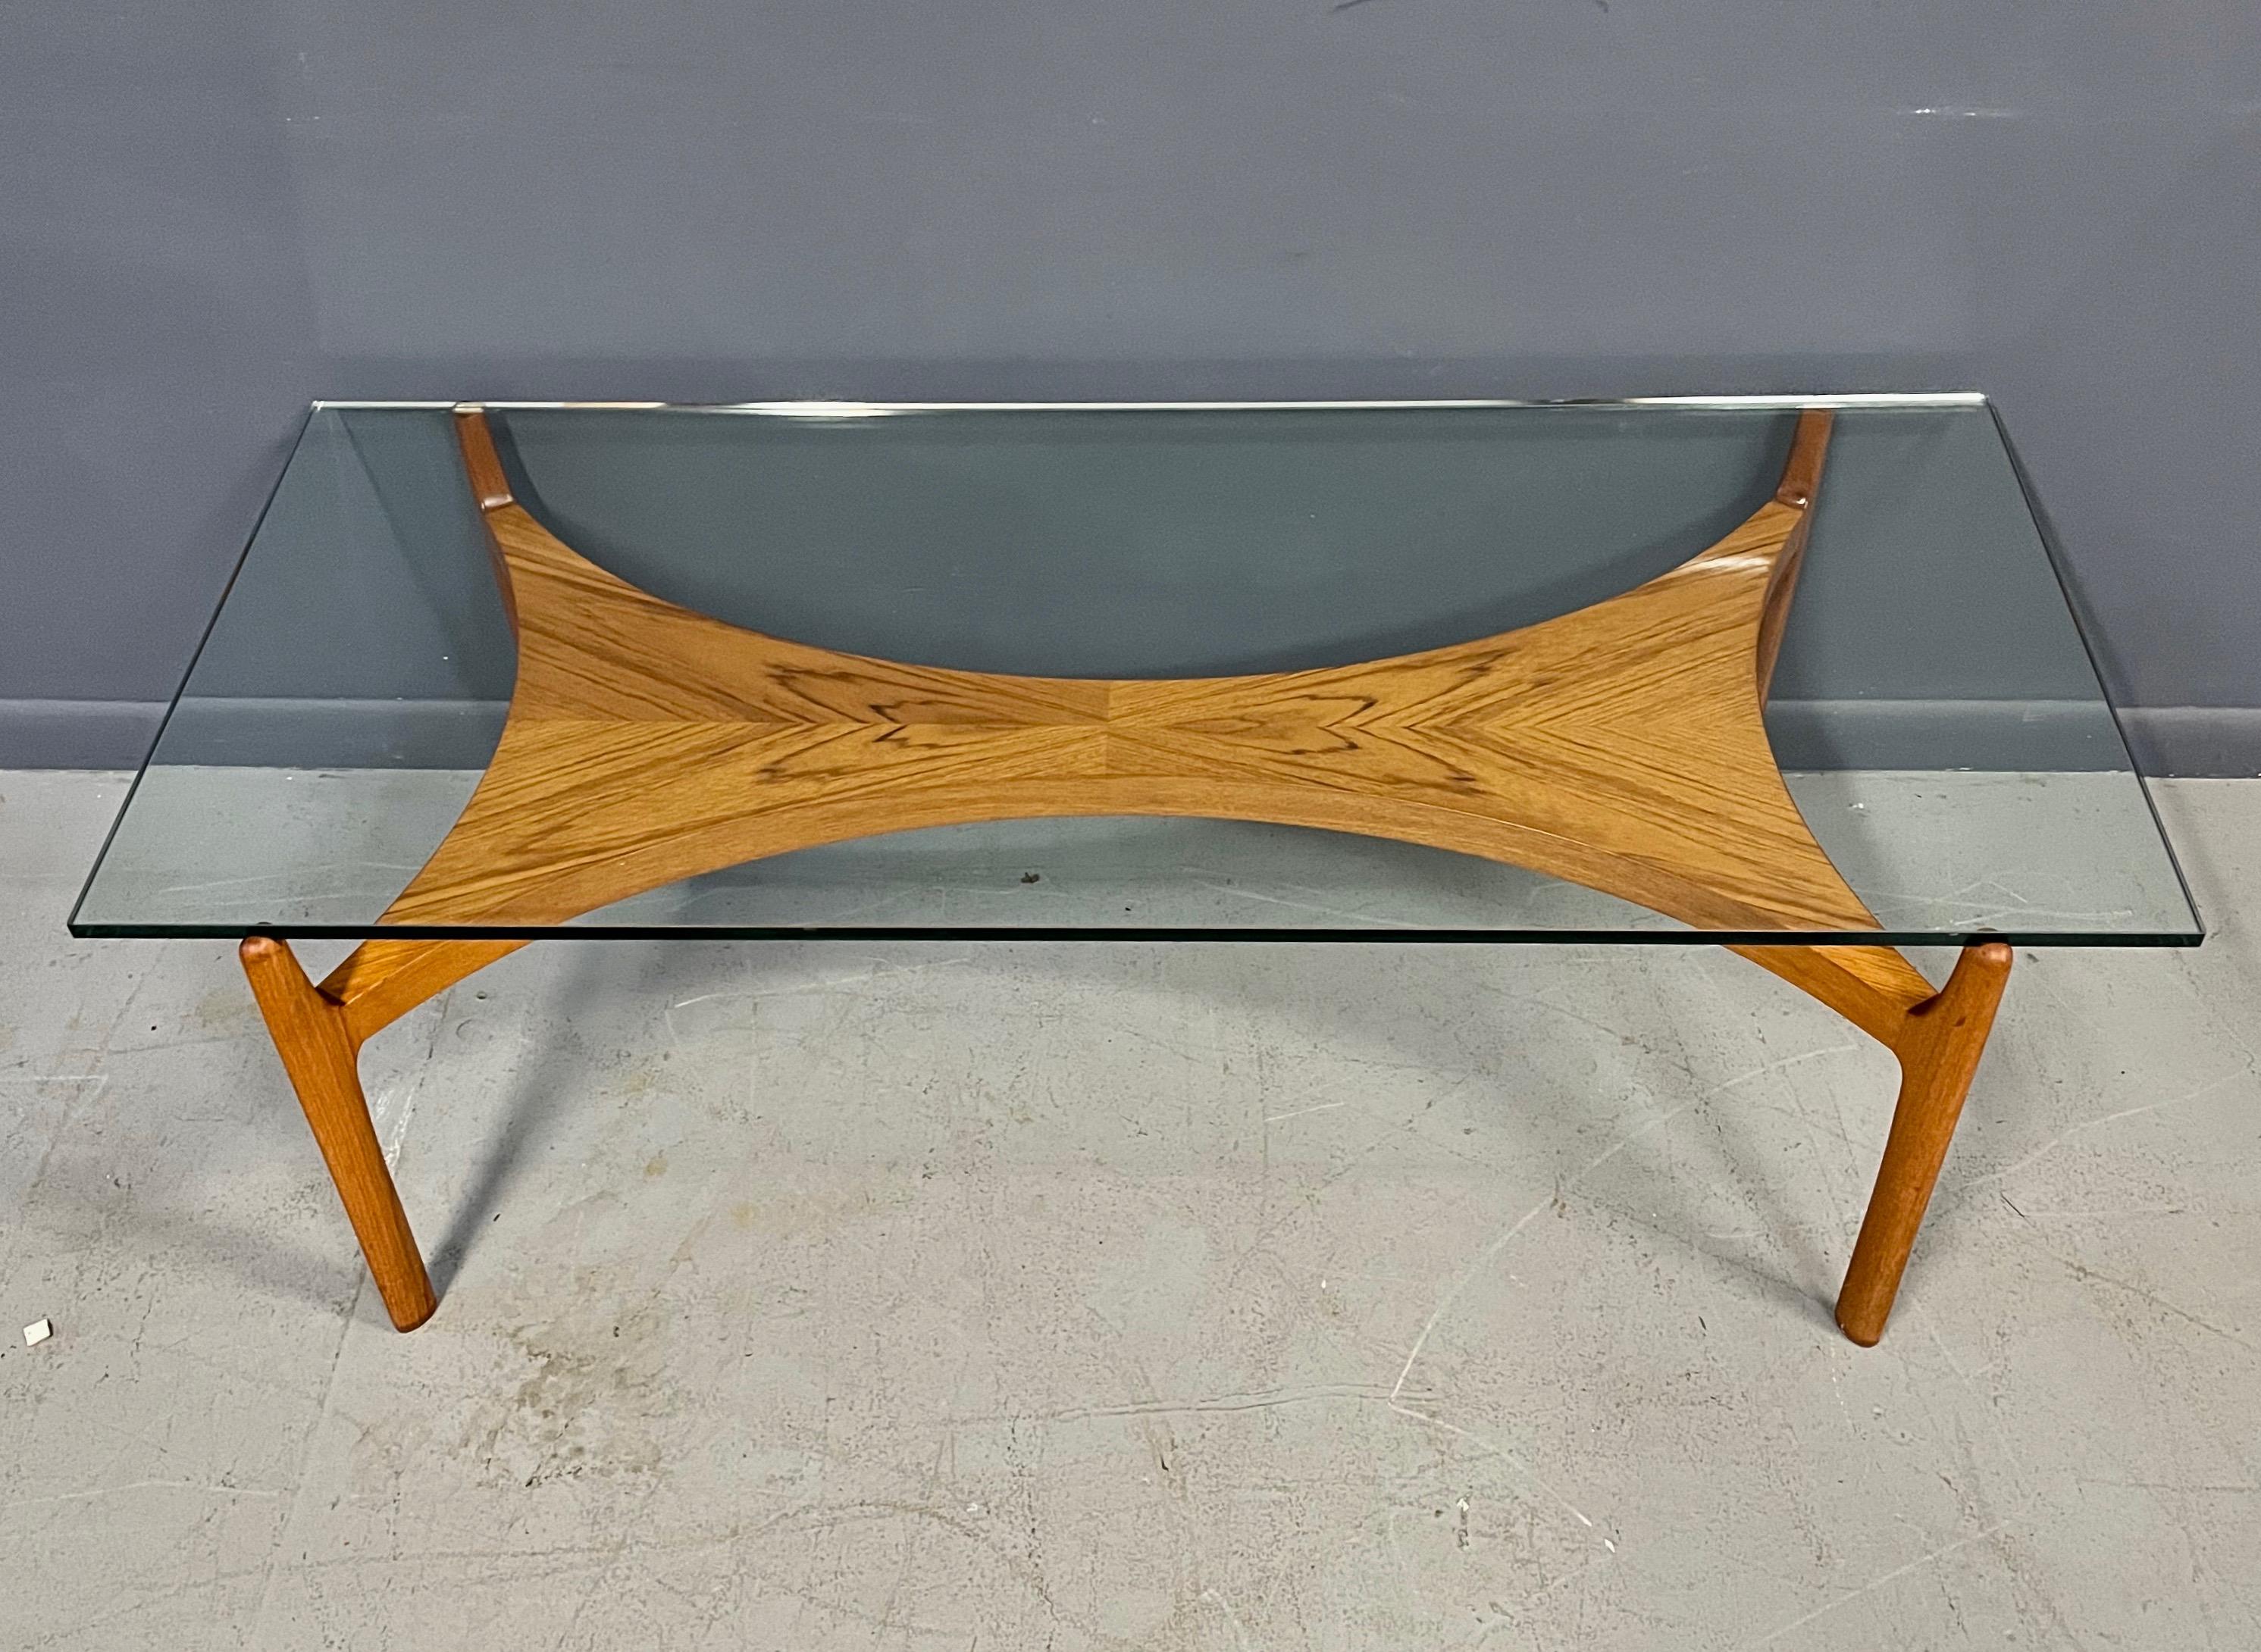 A Scandinavian Modern vintage coffee table designed by Sven Ellekaer 1960s, which was made of solid teak and veneered teak. The sculptural teak base is topped with an original clear glass plate.